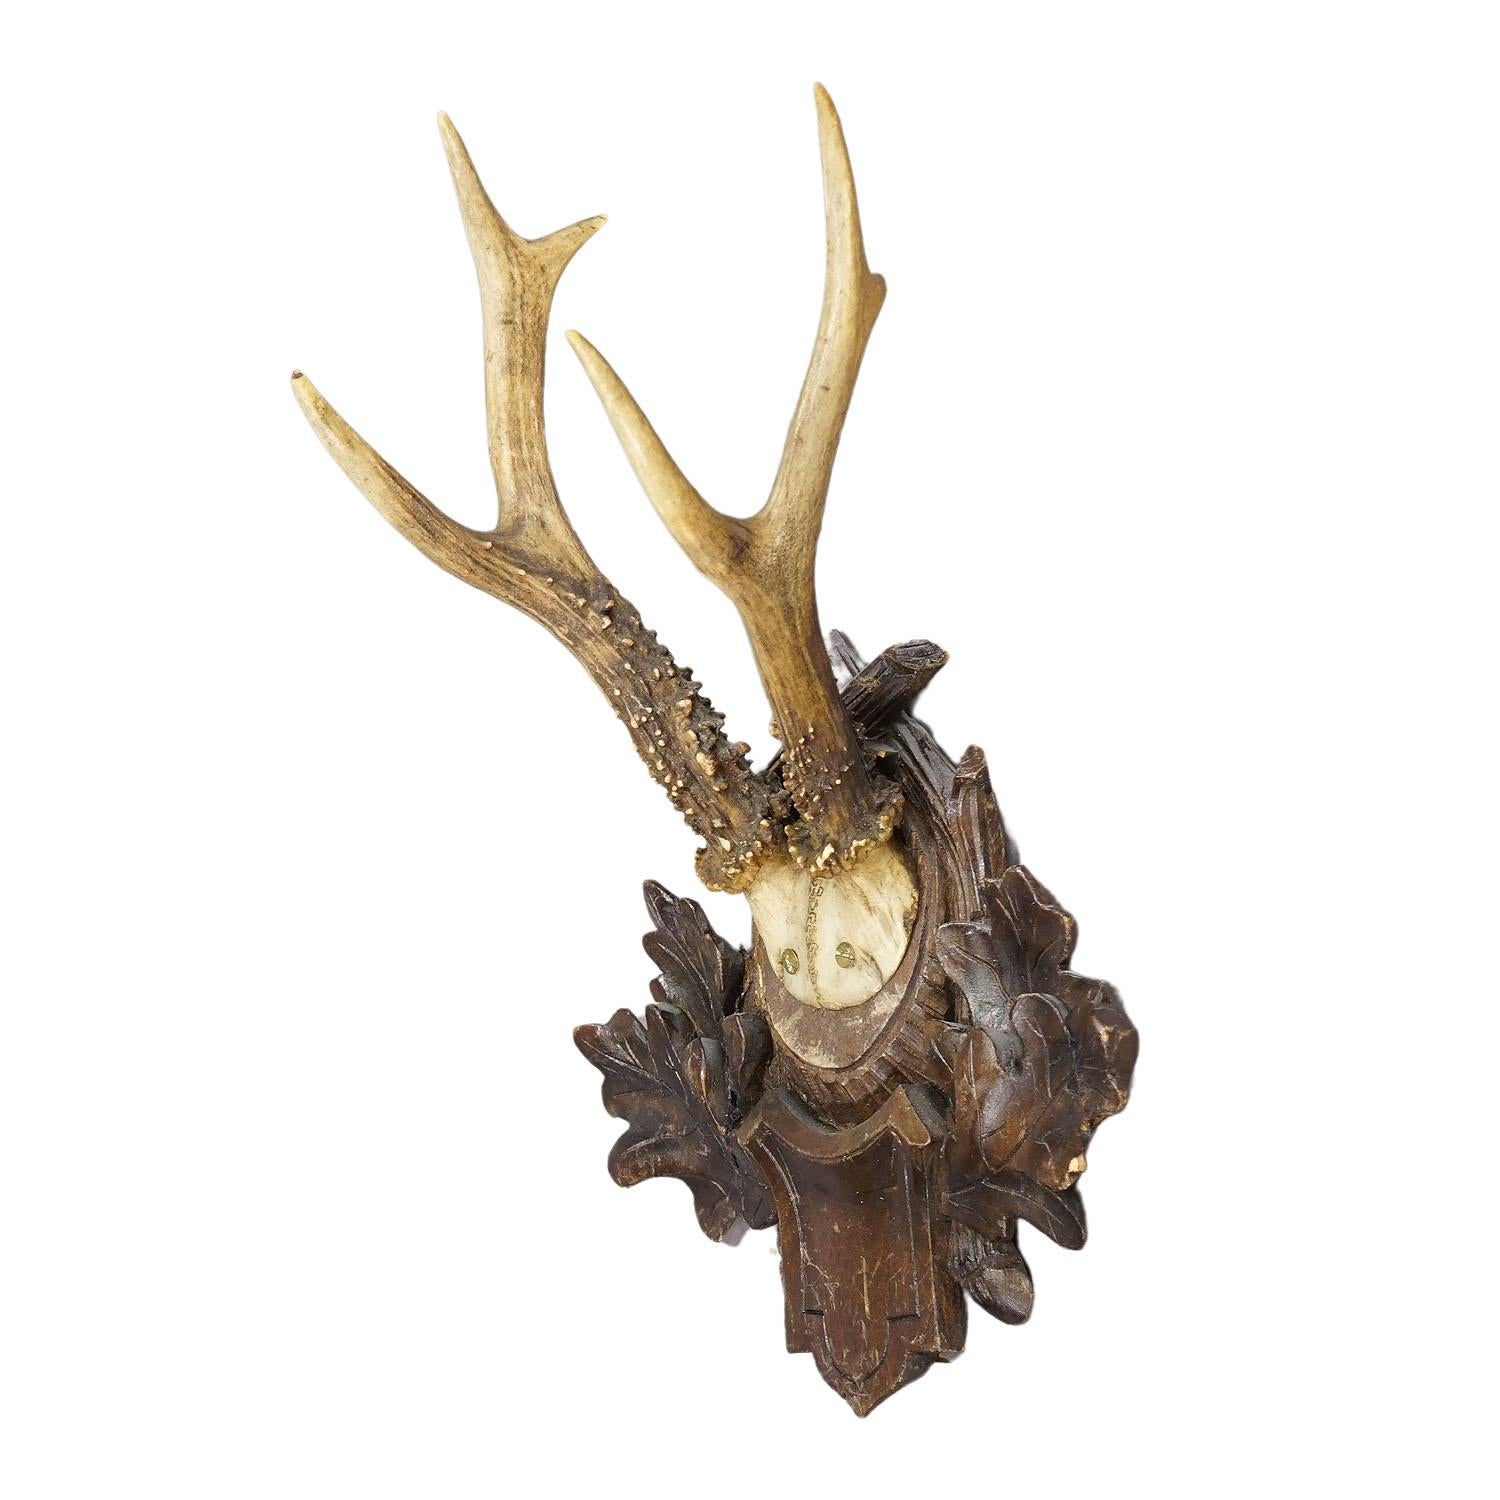 Great Deer Trophy Mount on Wooden Carved Plaque circa 1900s.

A large antique deer (Capreolus capreolus) trophy on a wooden carved plaque with dark brown finish. The trophy was shot in the late 19th century. Good condition.

Trophies are